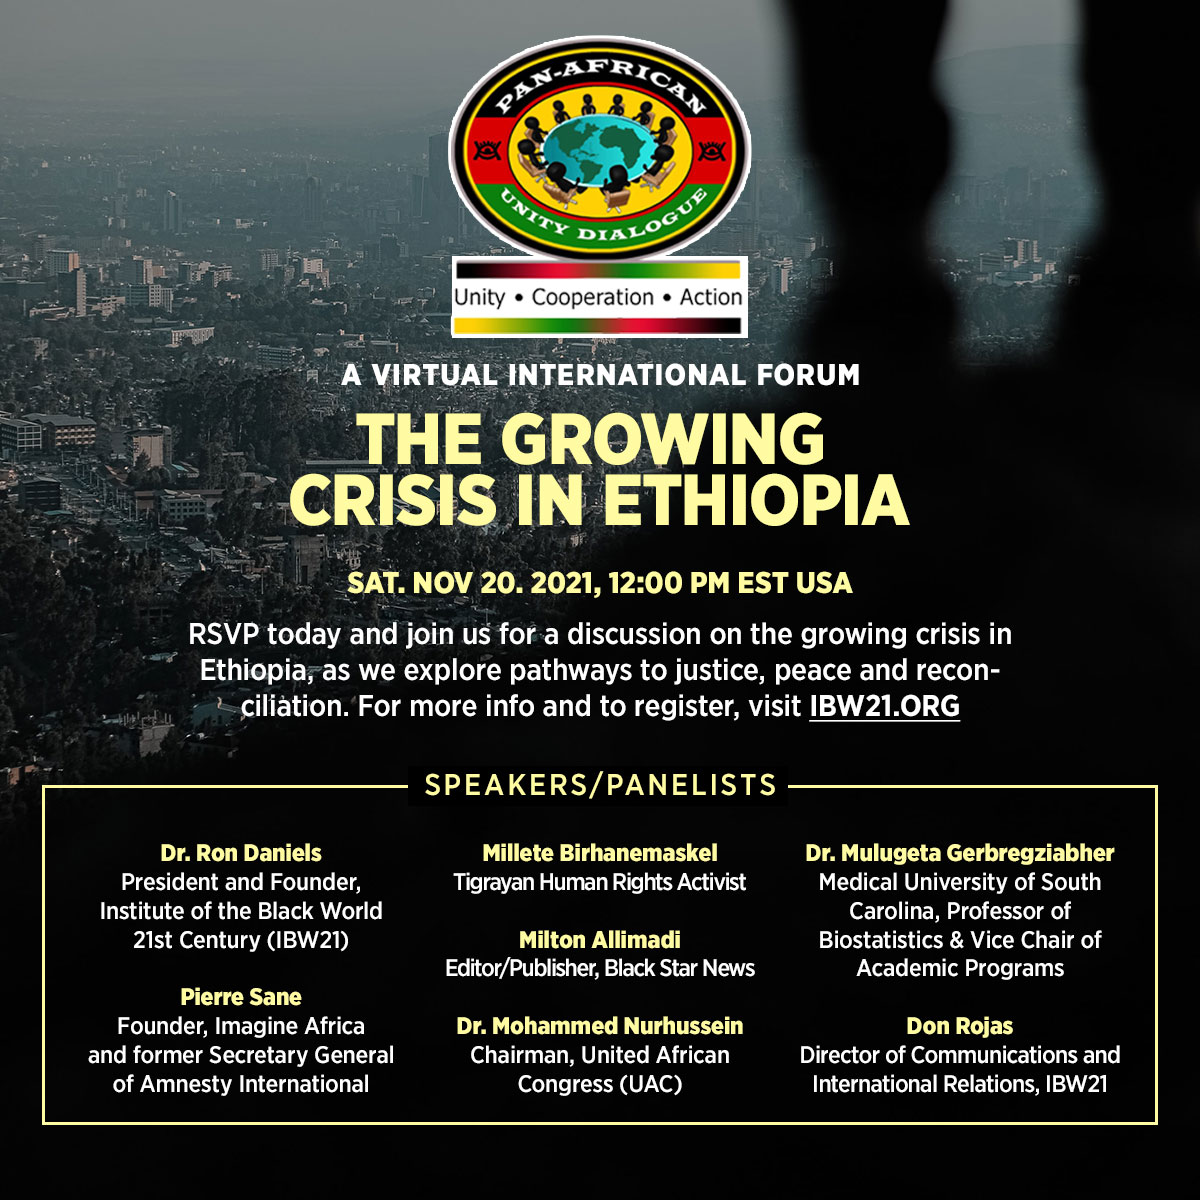 Saturday. November 20, 2021 — Join us for a discussion on the growing crisis in Ethiopia, as we explore pathways to justice, peace and reconciliation.